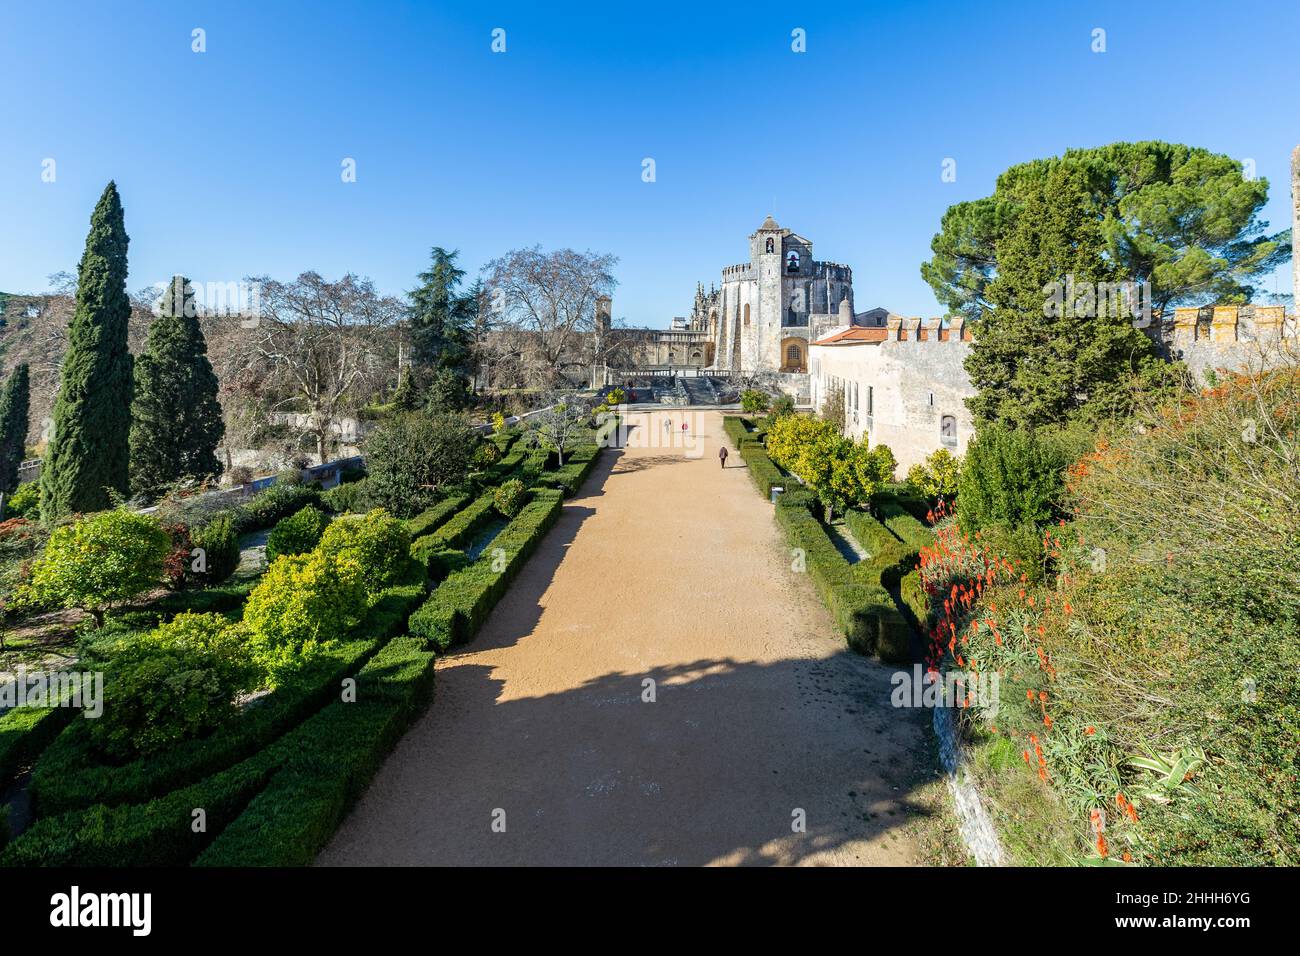 Convent of Christ or 'Convento de Cristo' is ornately sculpted, Manueline style, hilltop Roman Catholic convent in Tomar, Portugal. Stock Photo